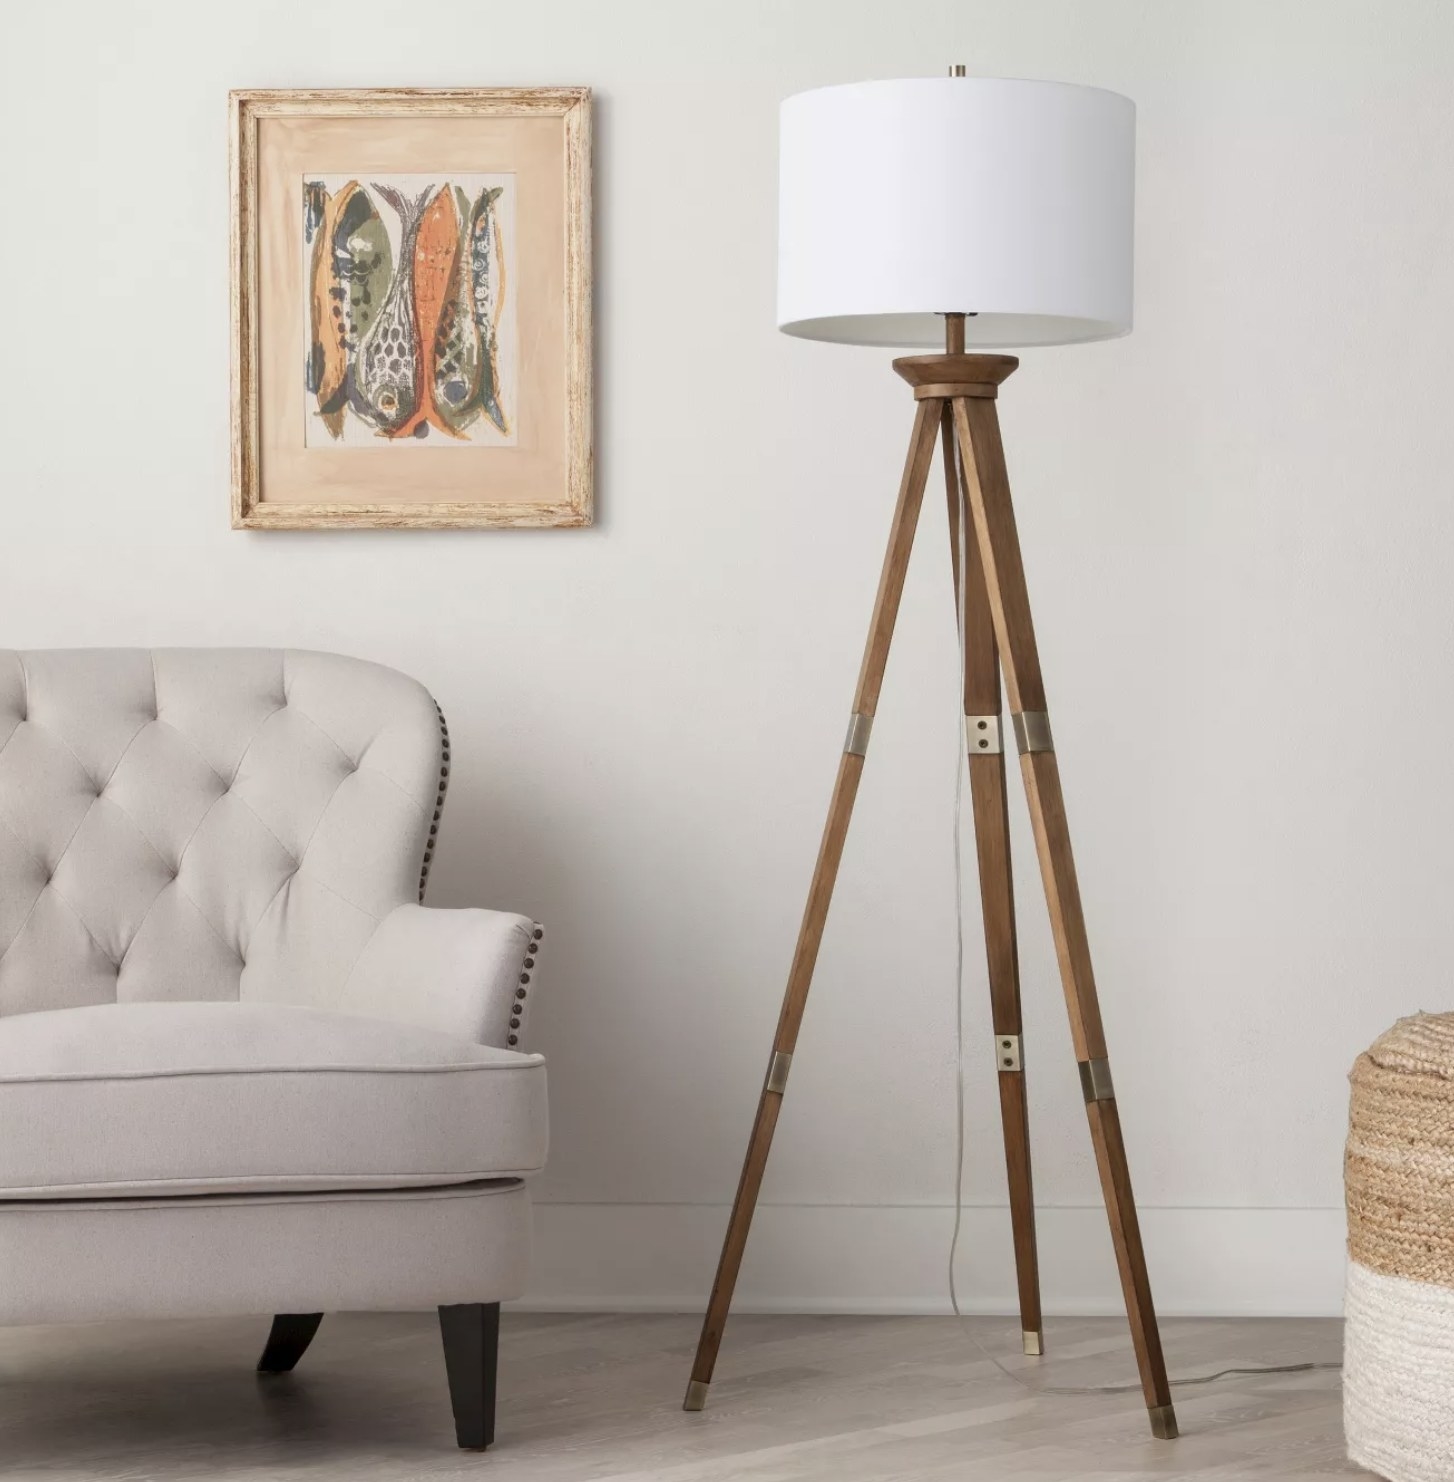 A wood tripod floor lamp in a living space with a white lamp shade